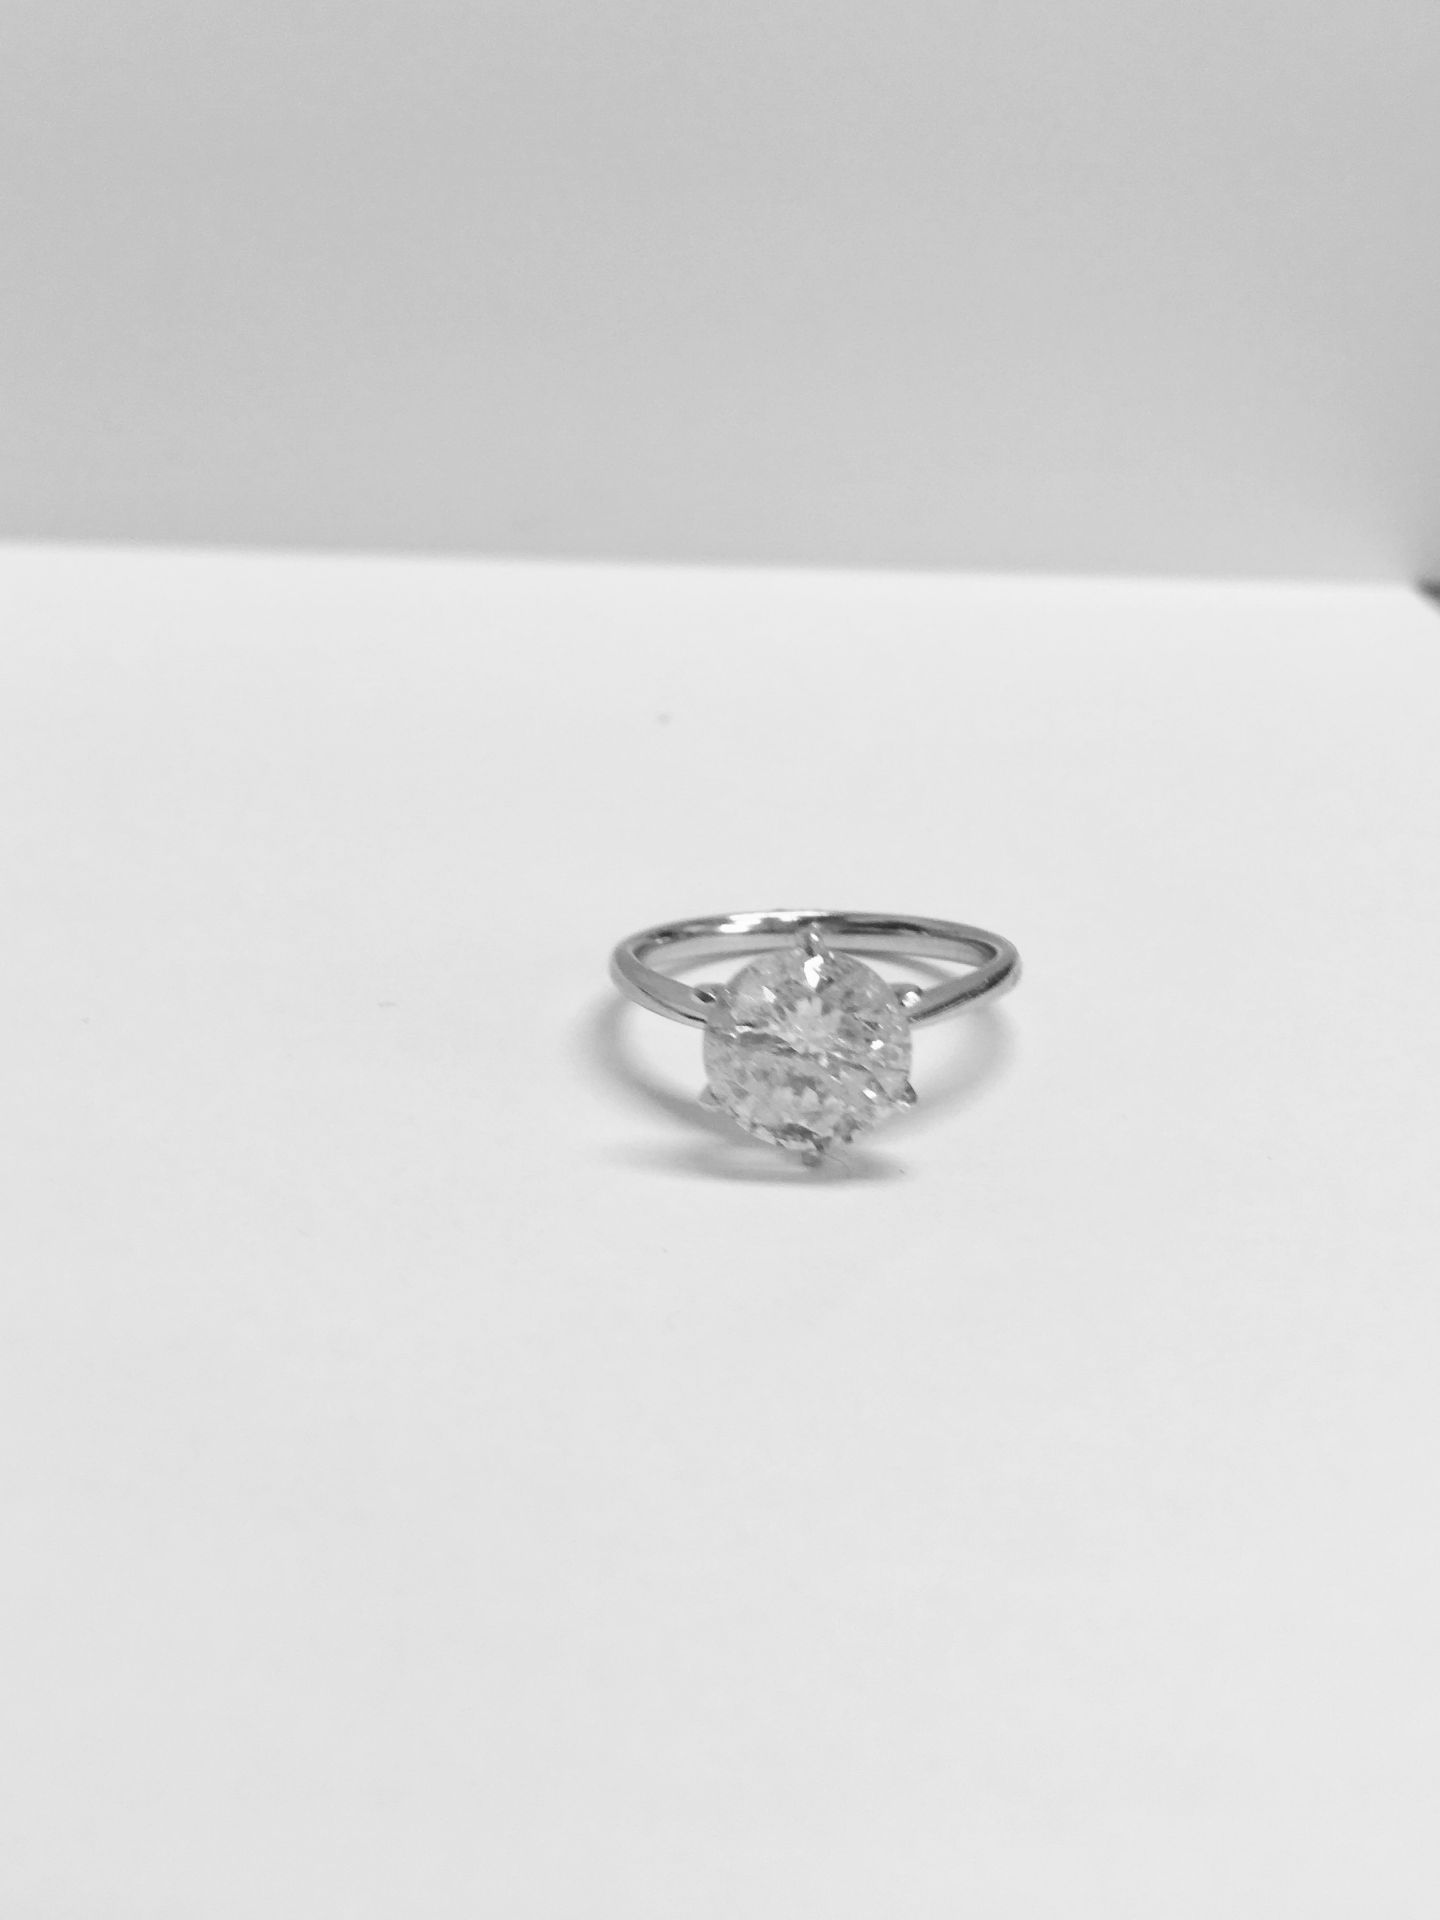 2.70ct diamond solitaire ring,h colour i1 quality (enhanced by laser drilling) diamond,5gms platinum - Image 2 of 7